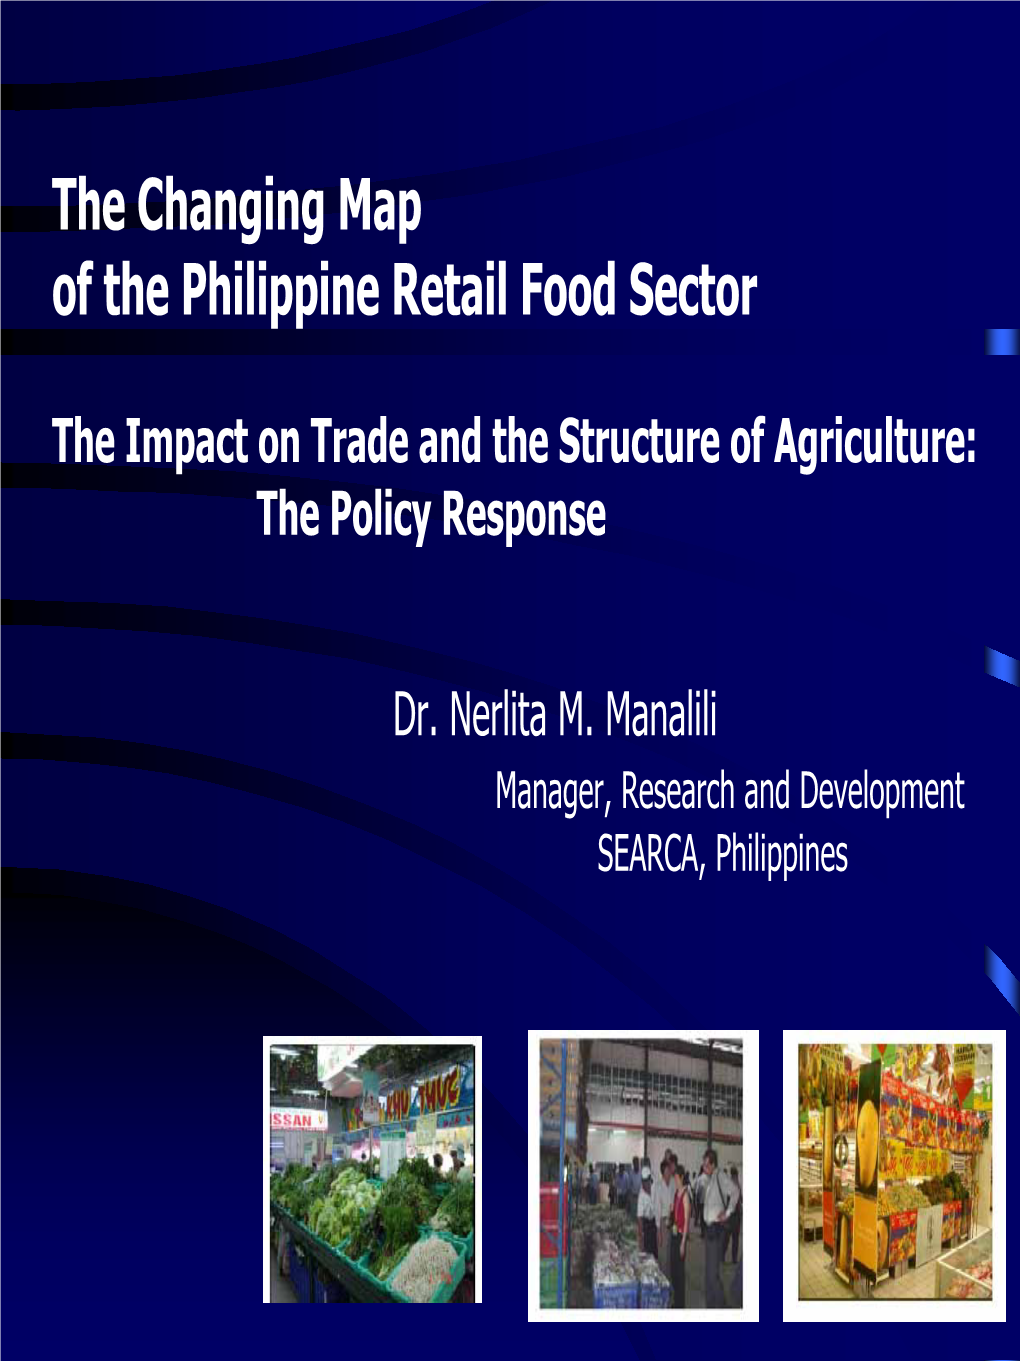 The Changing Map of the Philippine Retail Food Sector